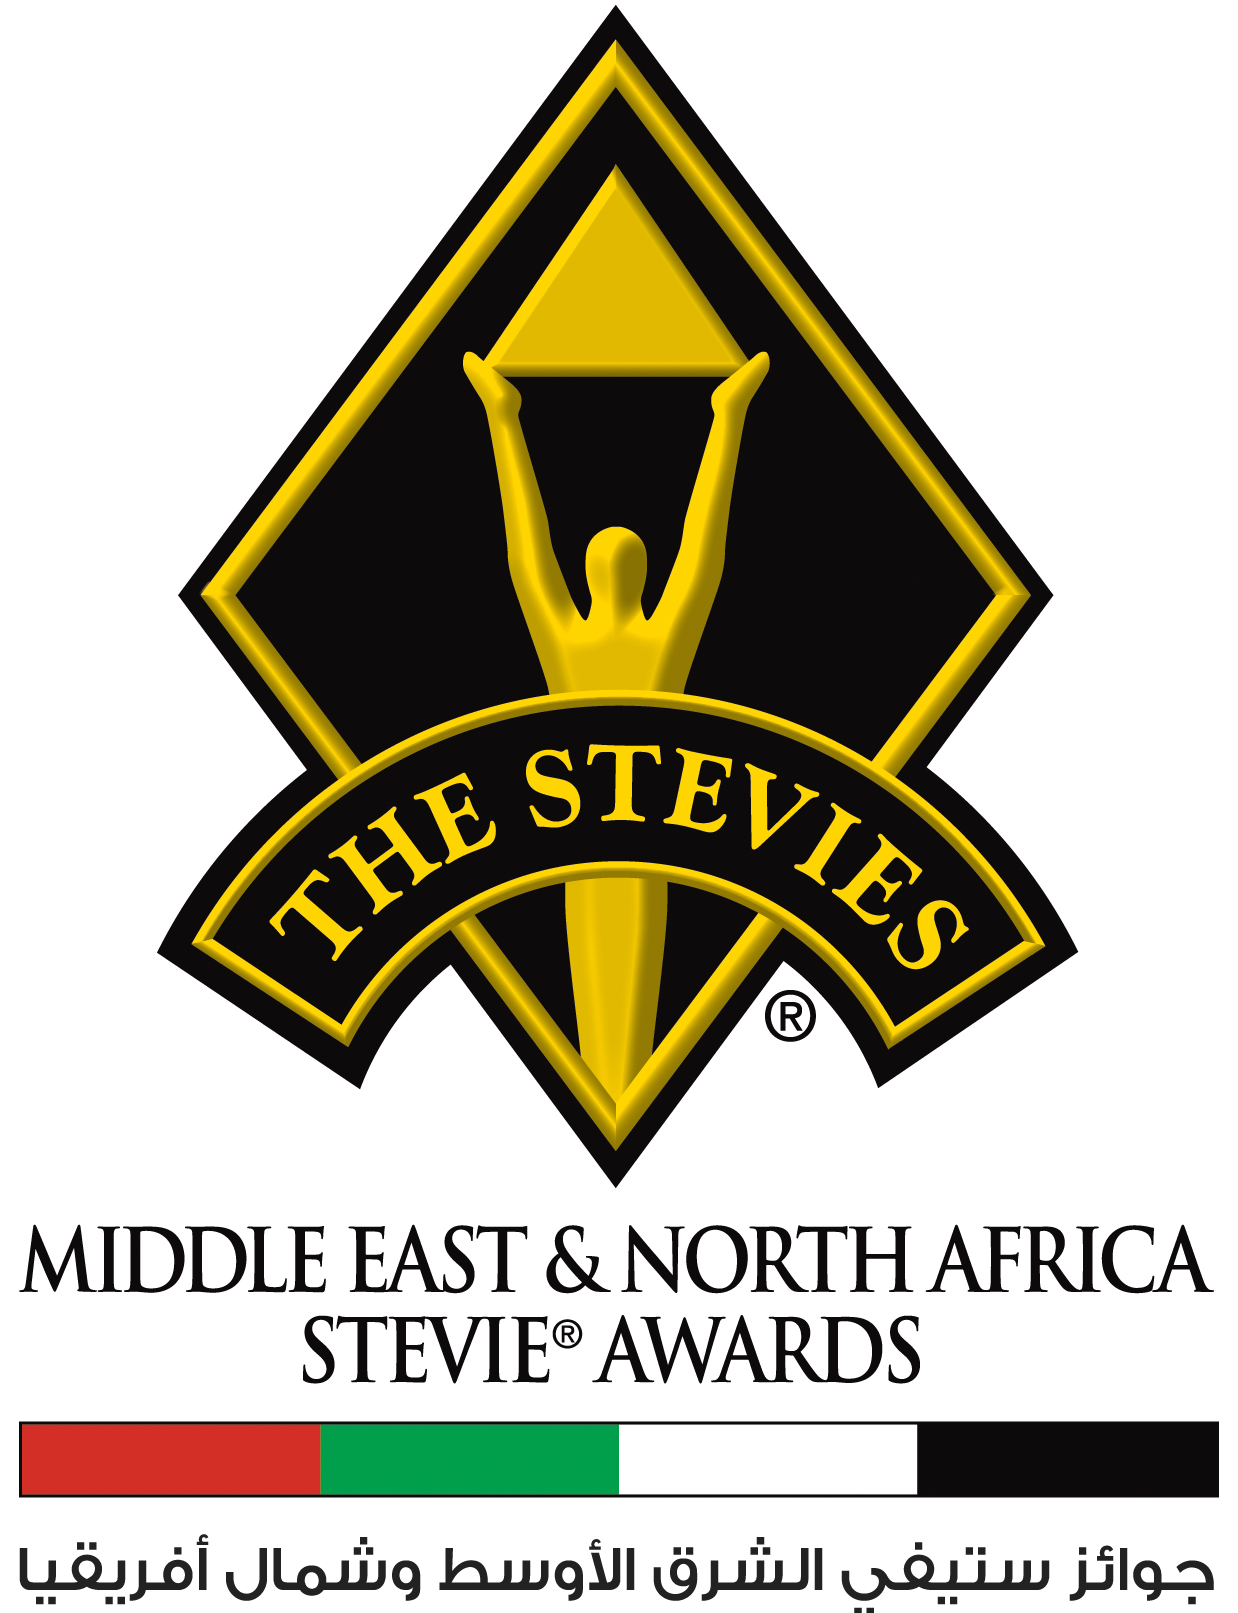 First Annual Middle East Stevie Awards Winners Honored in Virtual Ceremony